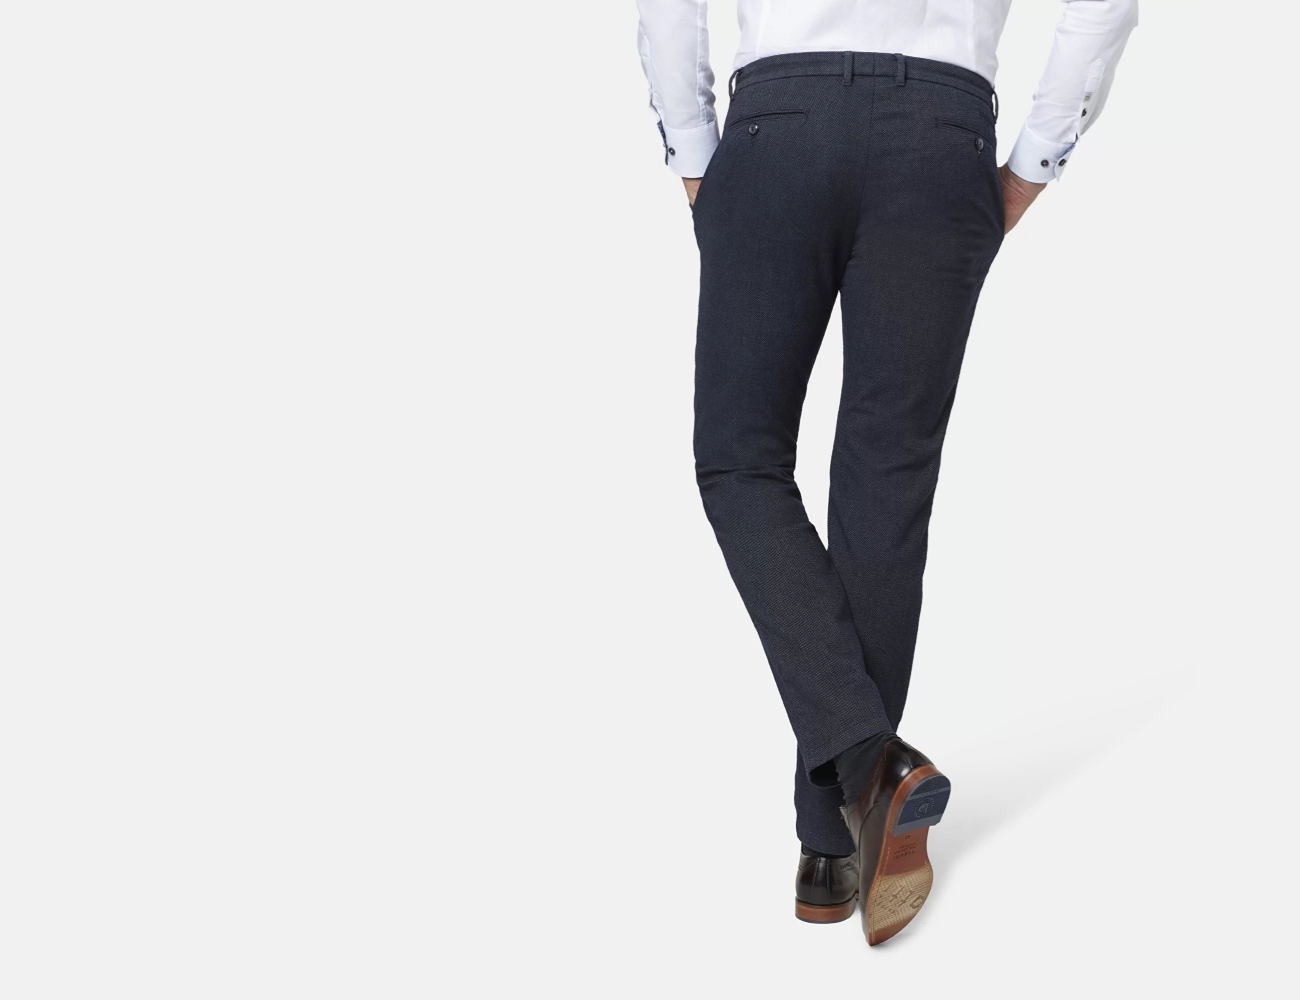 Buy Next Men Blue Slim Fit Solid Formal Trousers - Trousers for Men 7642997  | Myntra